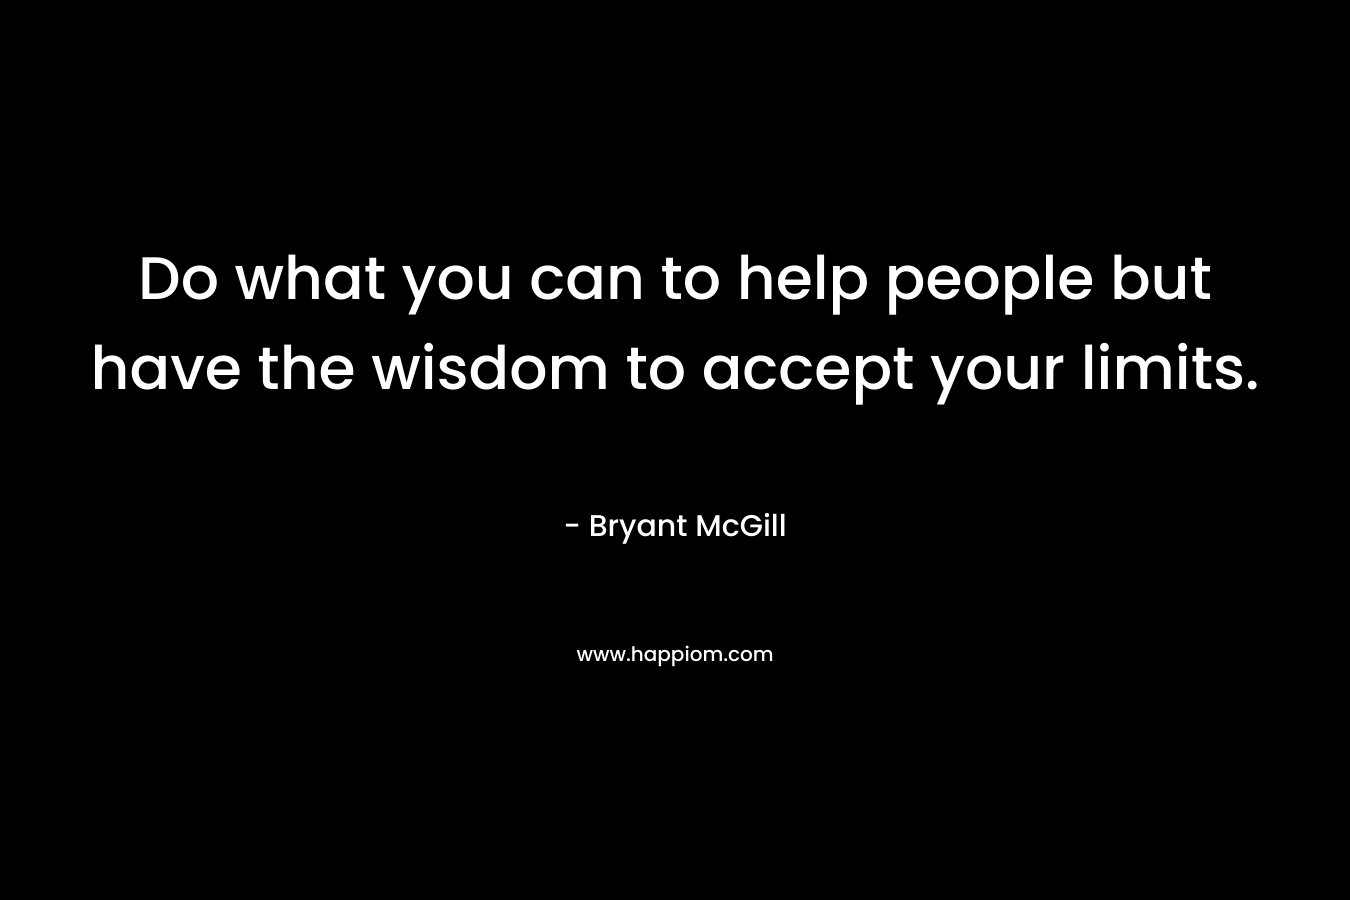 Do what you can to help people but have the wisdom to accept your limits.